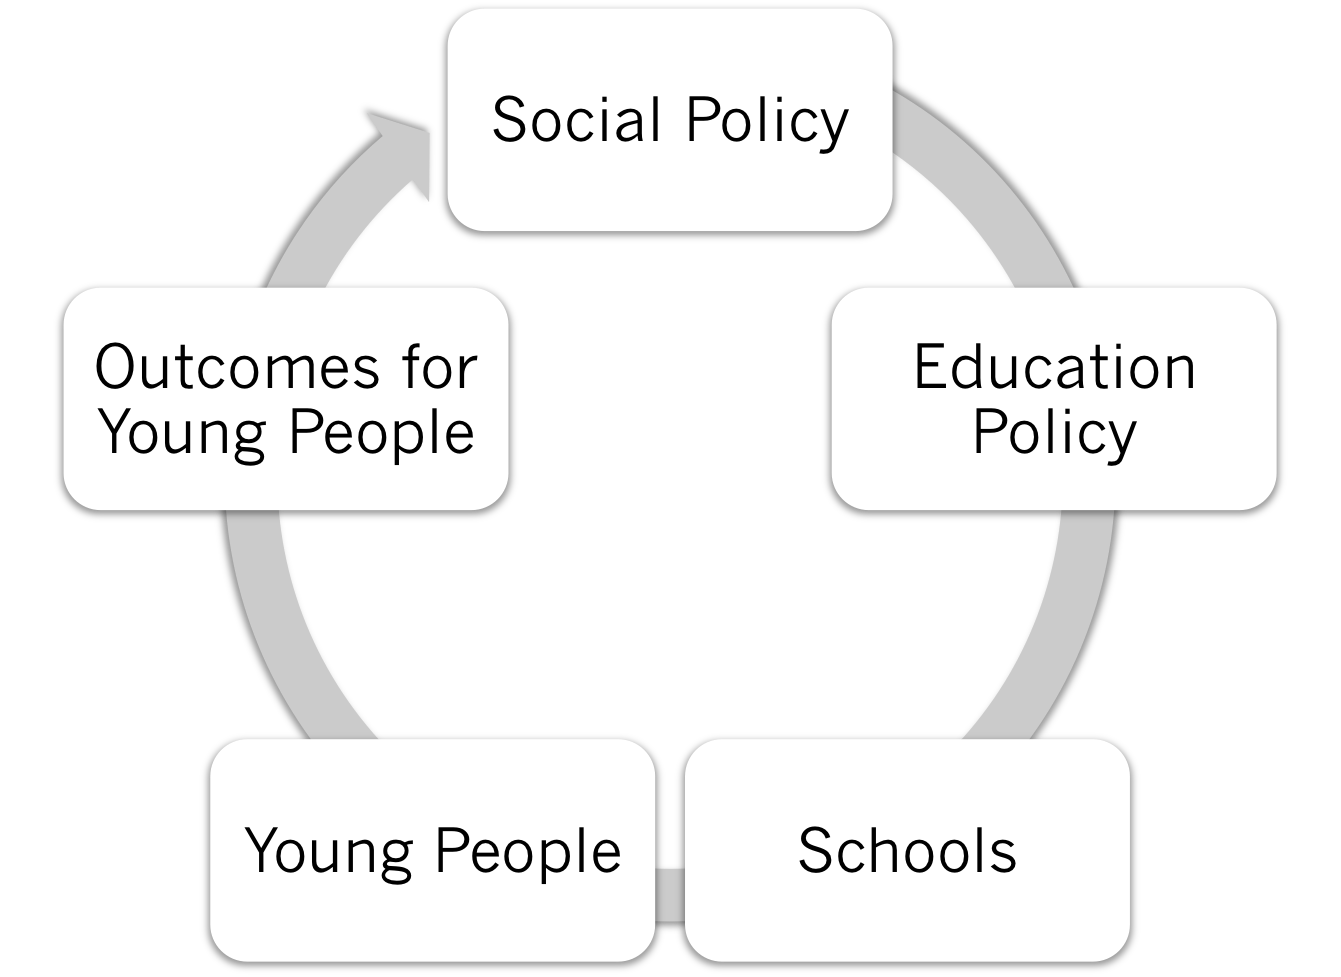 Figure 4. The theoretical cycle of influence between social policy and outcomes for young people in schools, showing the stages of the cycle and the direction of interaction.